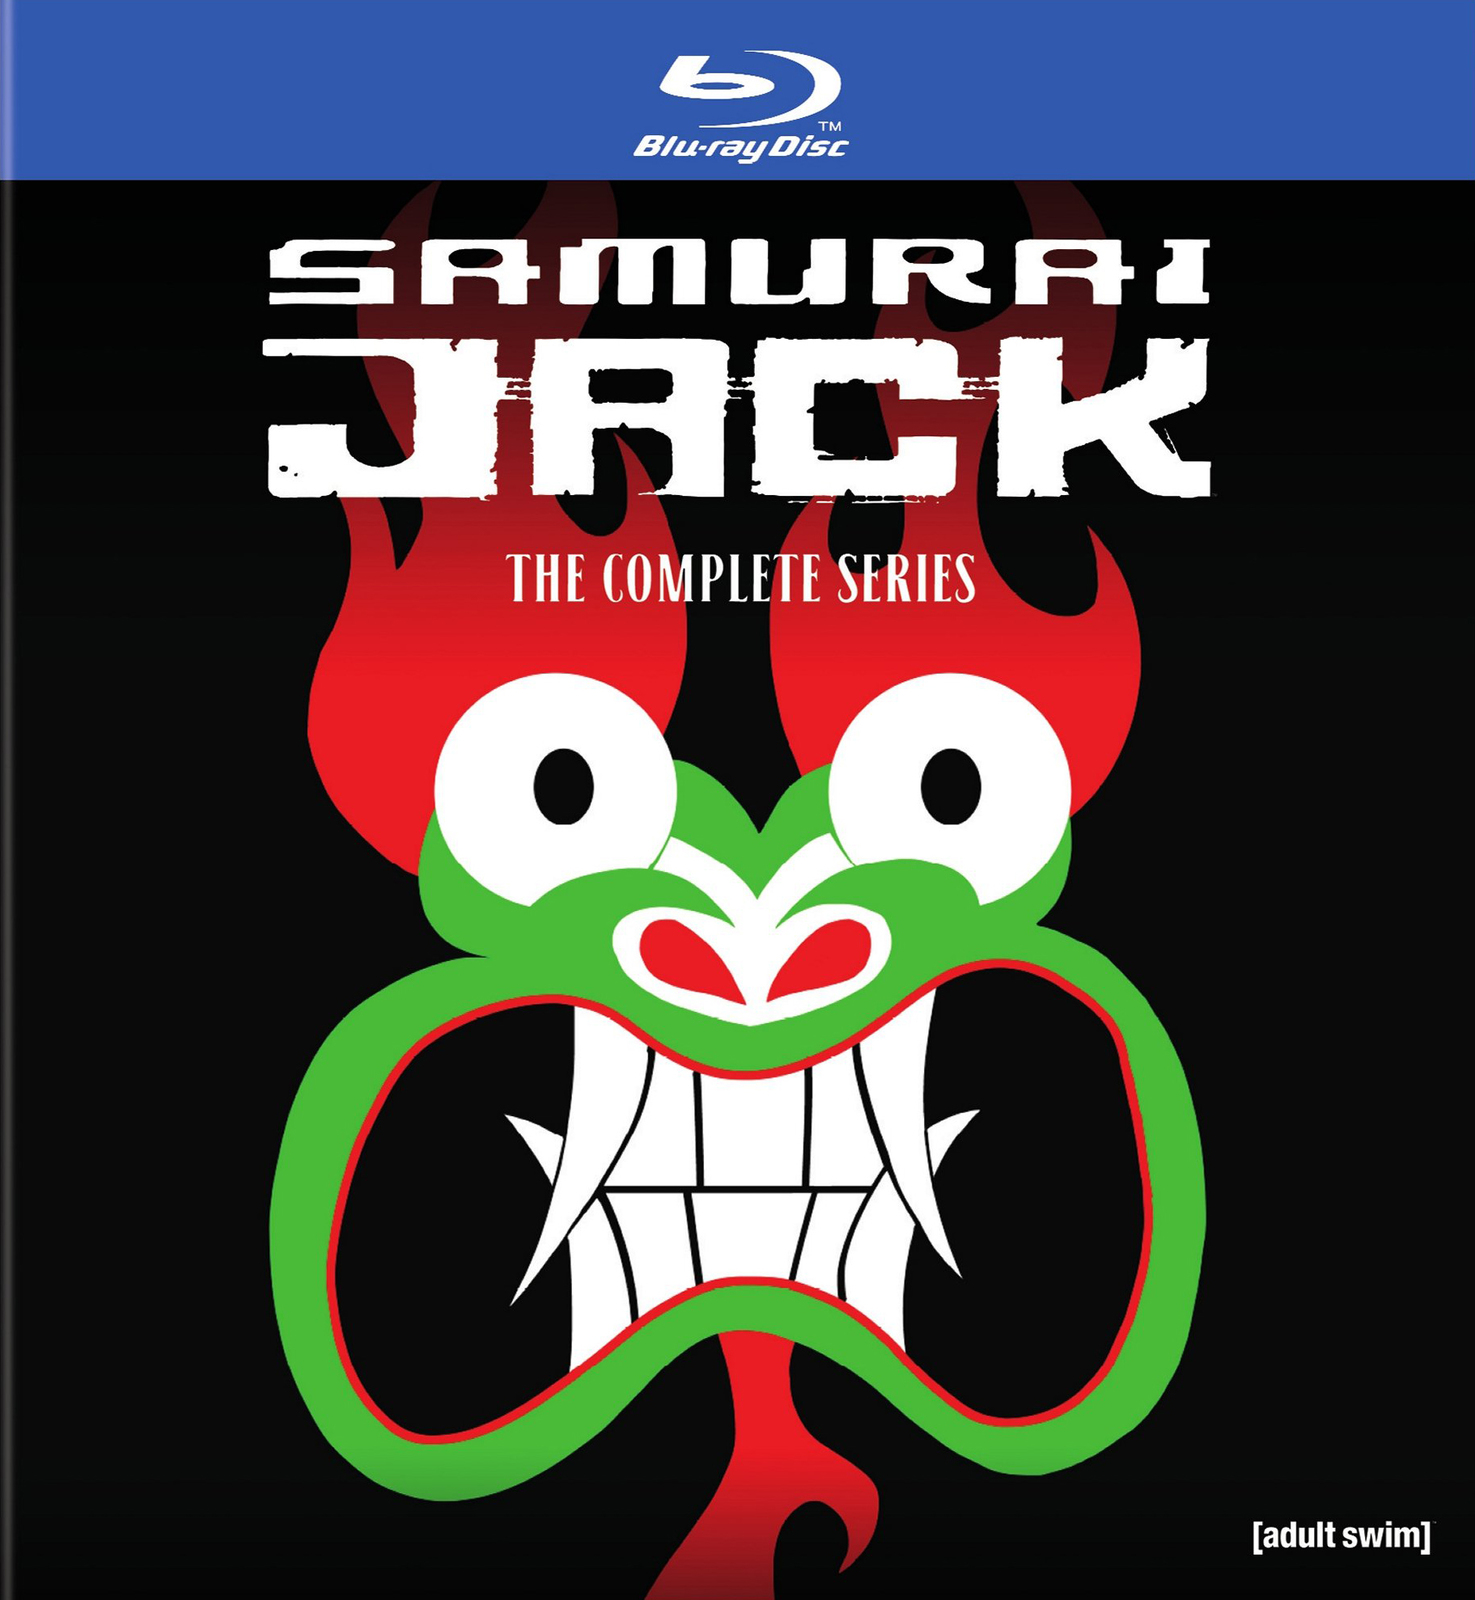 JackThe Complete Series Box Set [Blu-Ray]